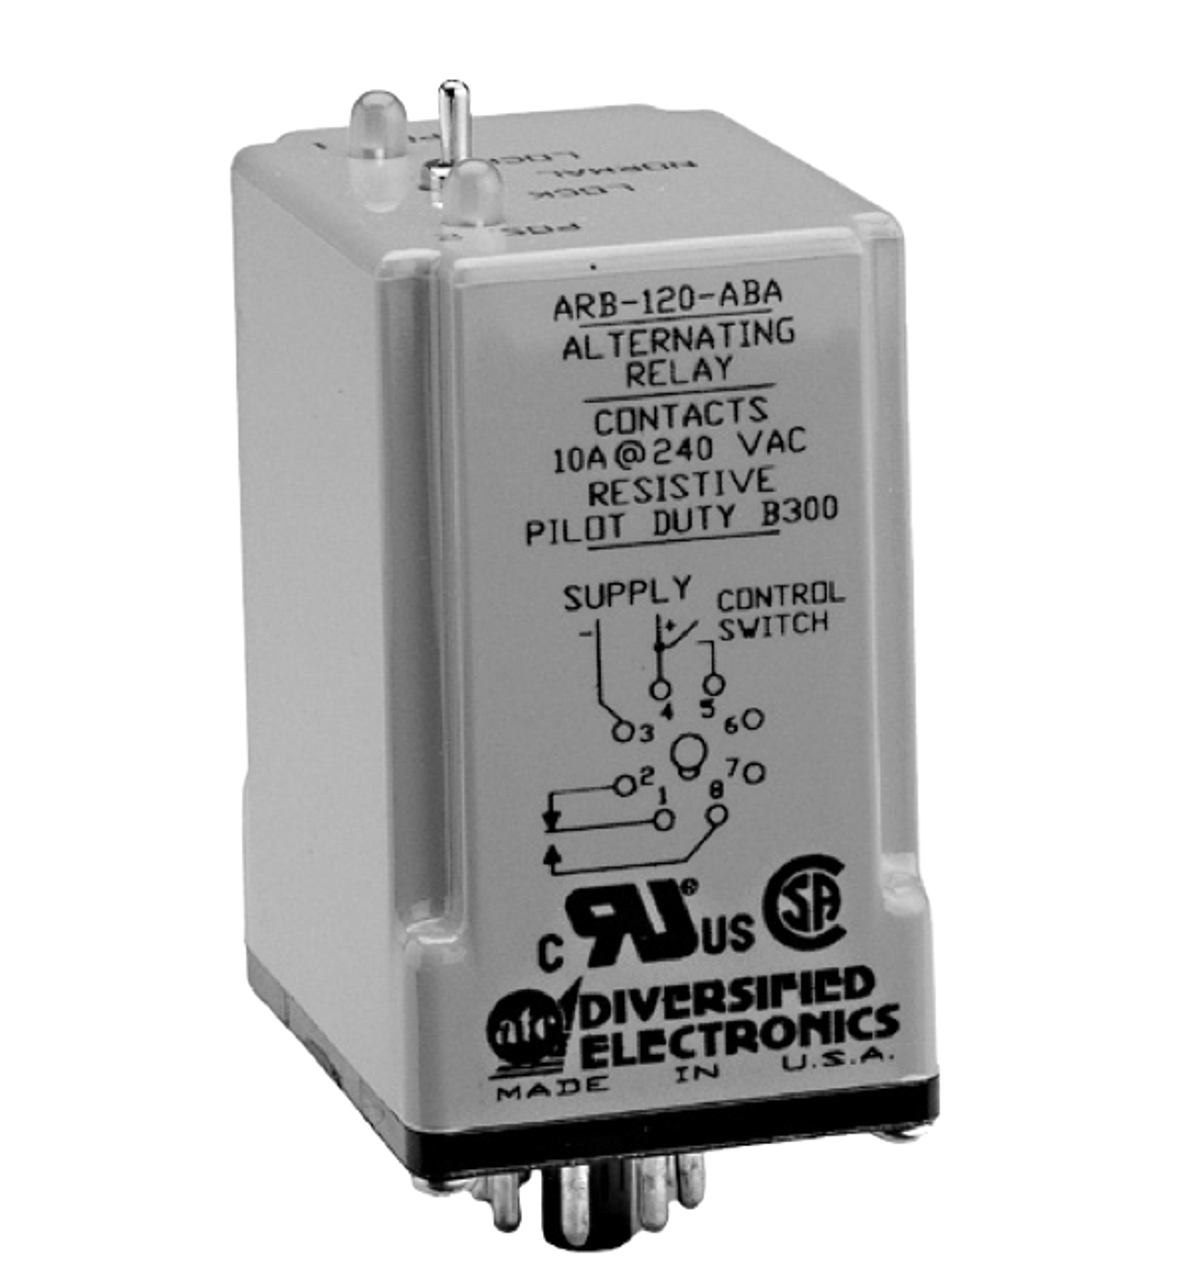 ATC Diversified - Alternating Sequencing Relay - ARB-208-ABA